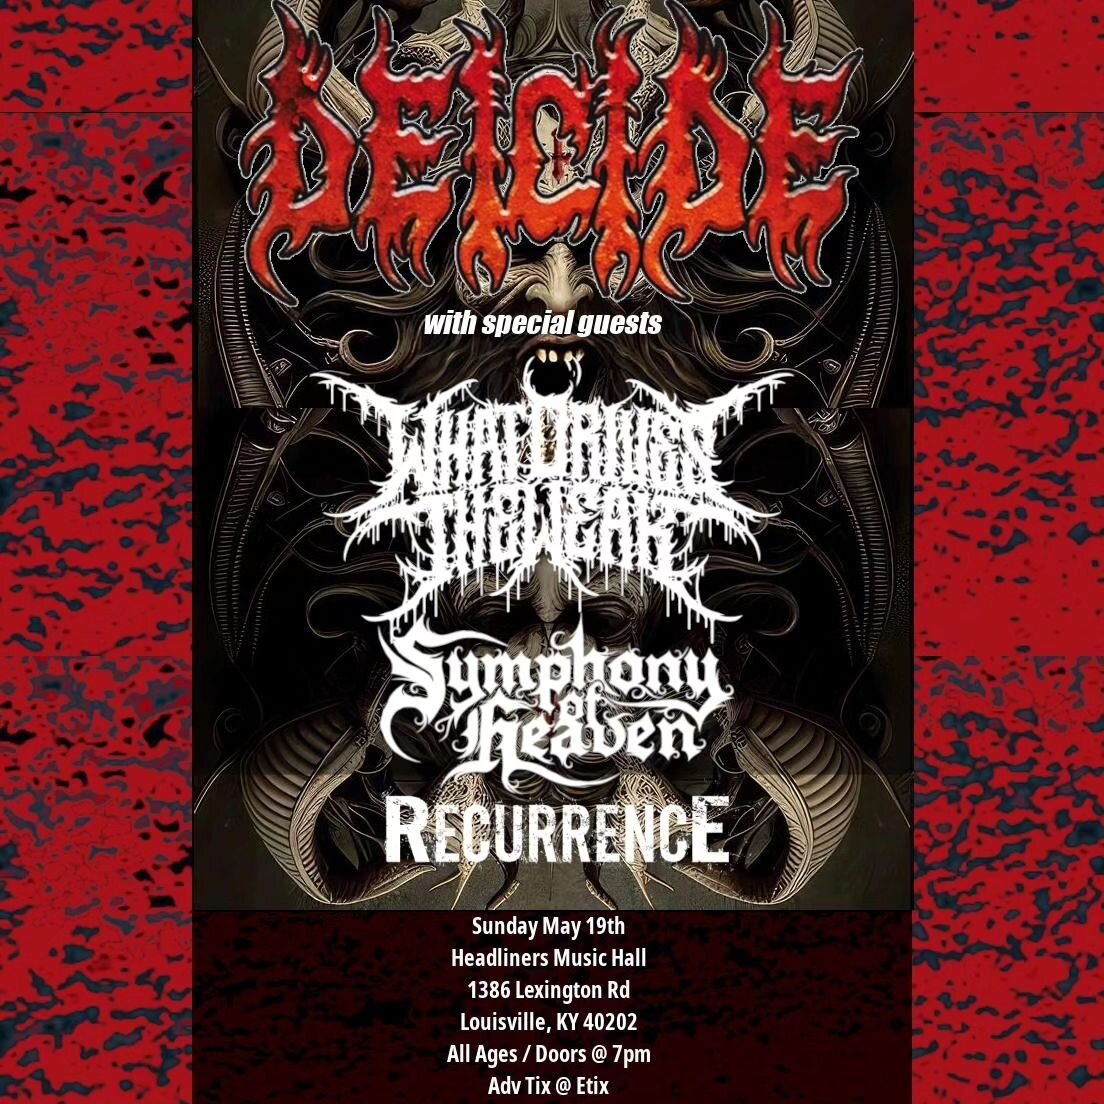 So excited to announce this show with you all! We are opening up for the legendary Deicide at @headlinersmusichall in Louisville, KY on Sunday May 19th! We are also opening up with some great bands such as @symphony_of_heaven and @whatdrivestheweak_o